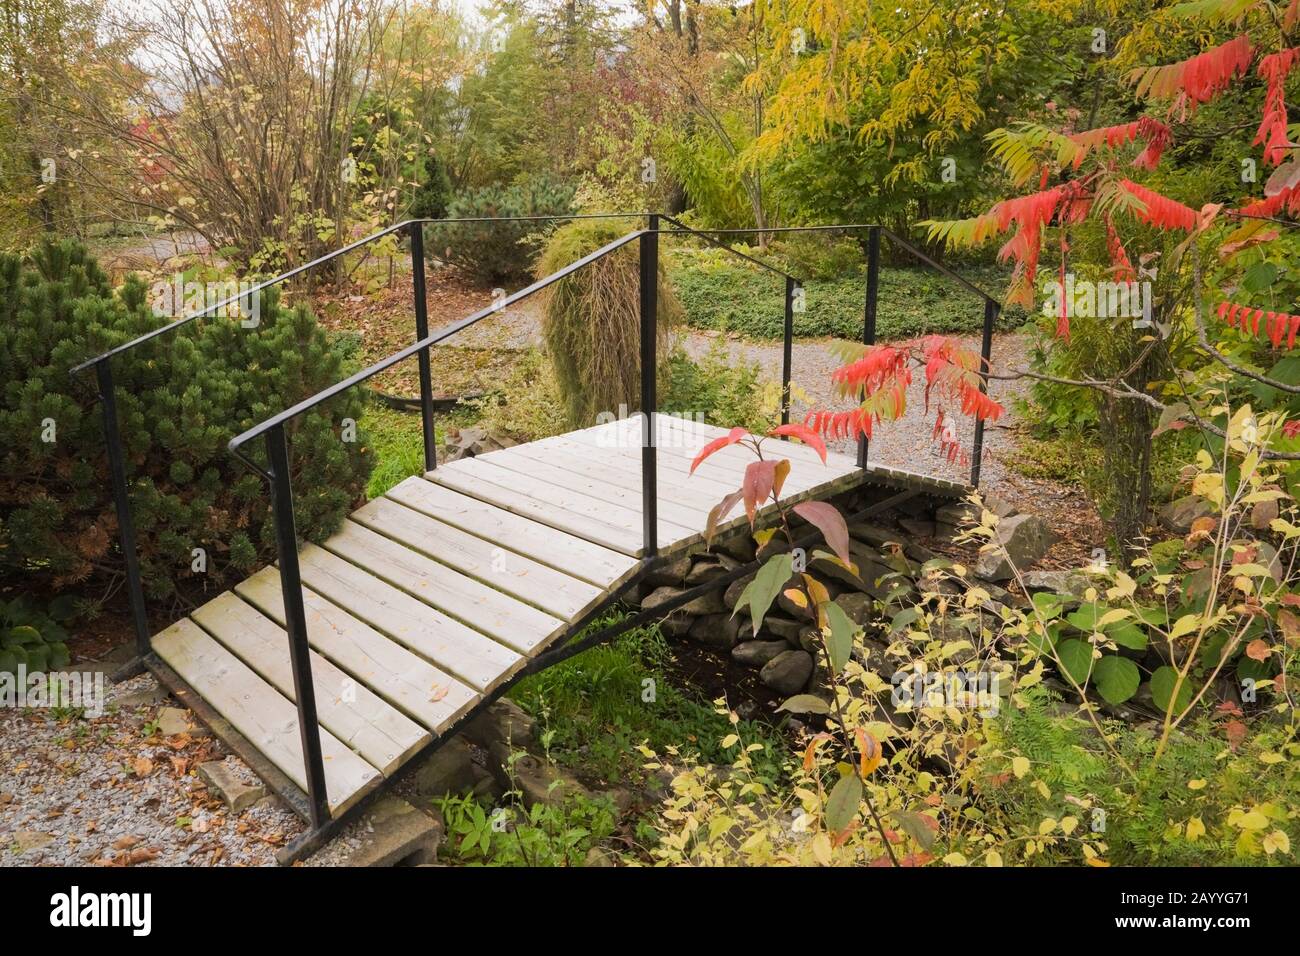 Pinus mugo 'Sherwood Compact' - Pine tree with a wooden footbridge and a Rhus typhina 'Laciniata'  - Sumac tree with red leaves in backyard garden. Stock Photo